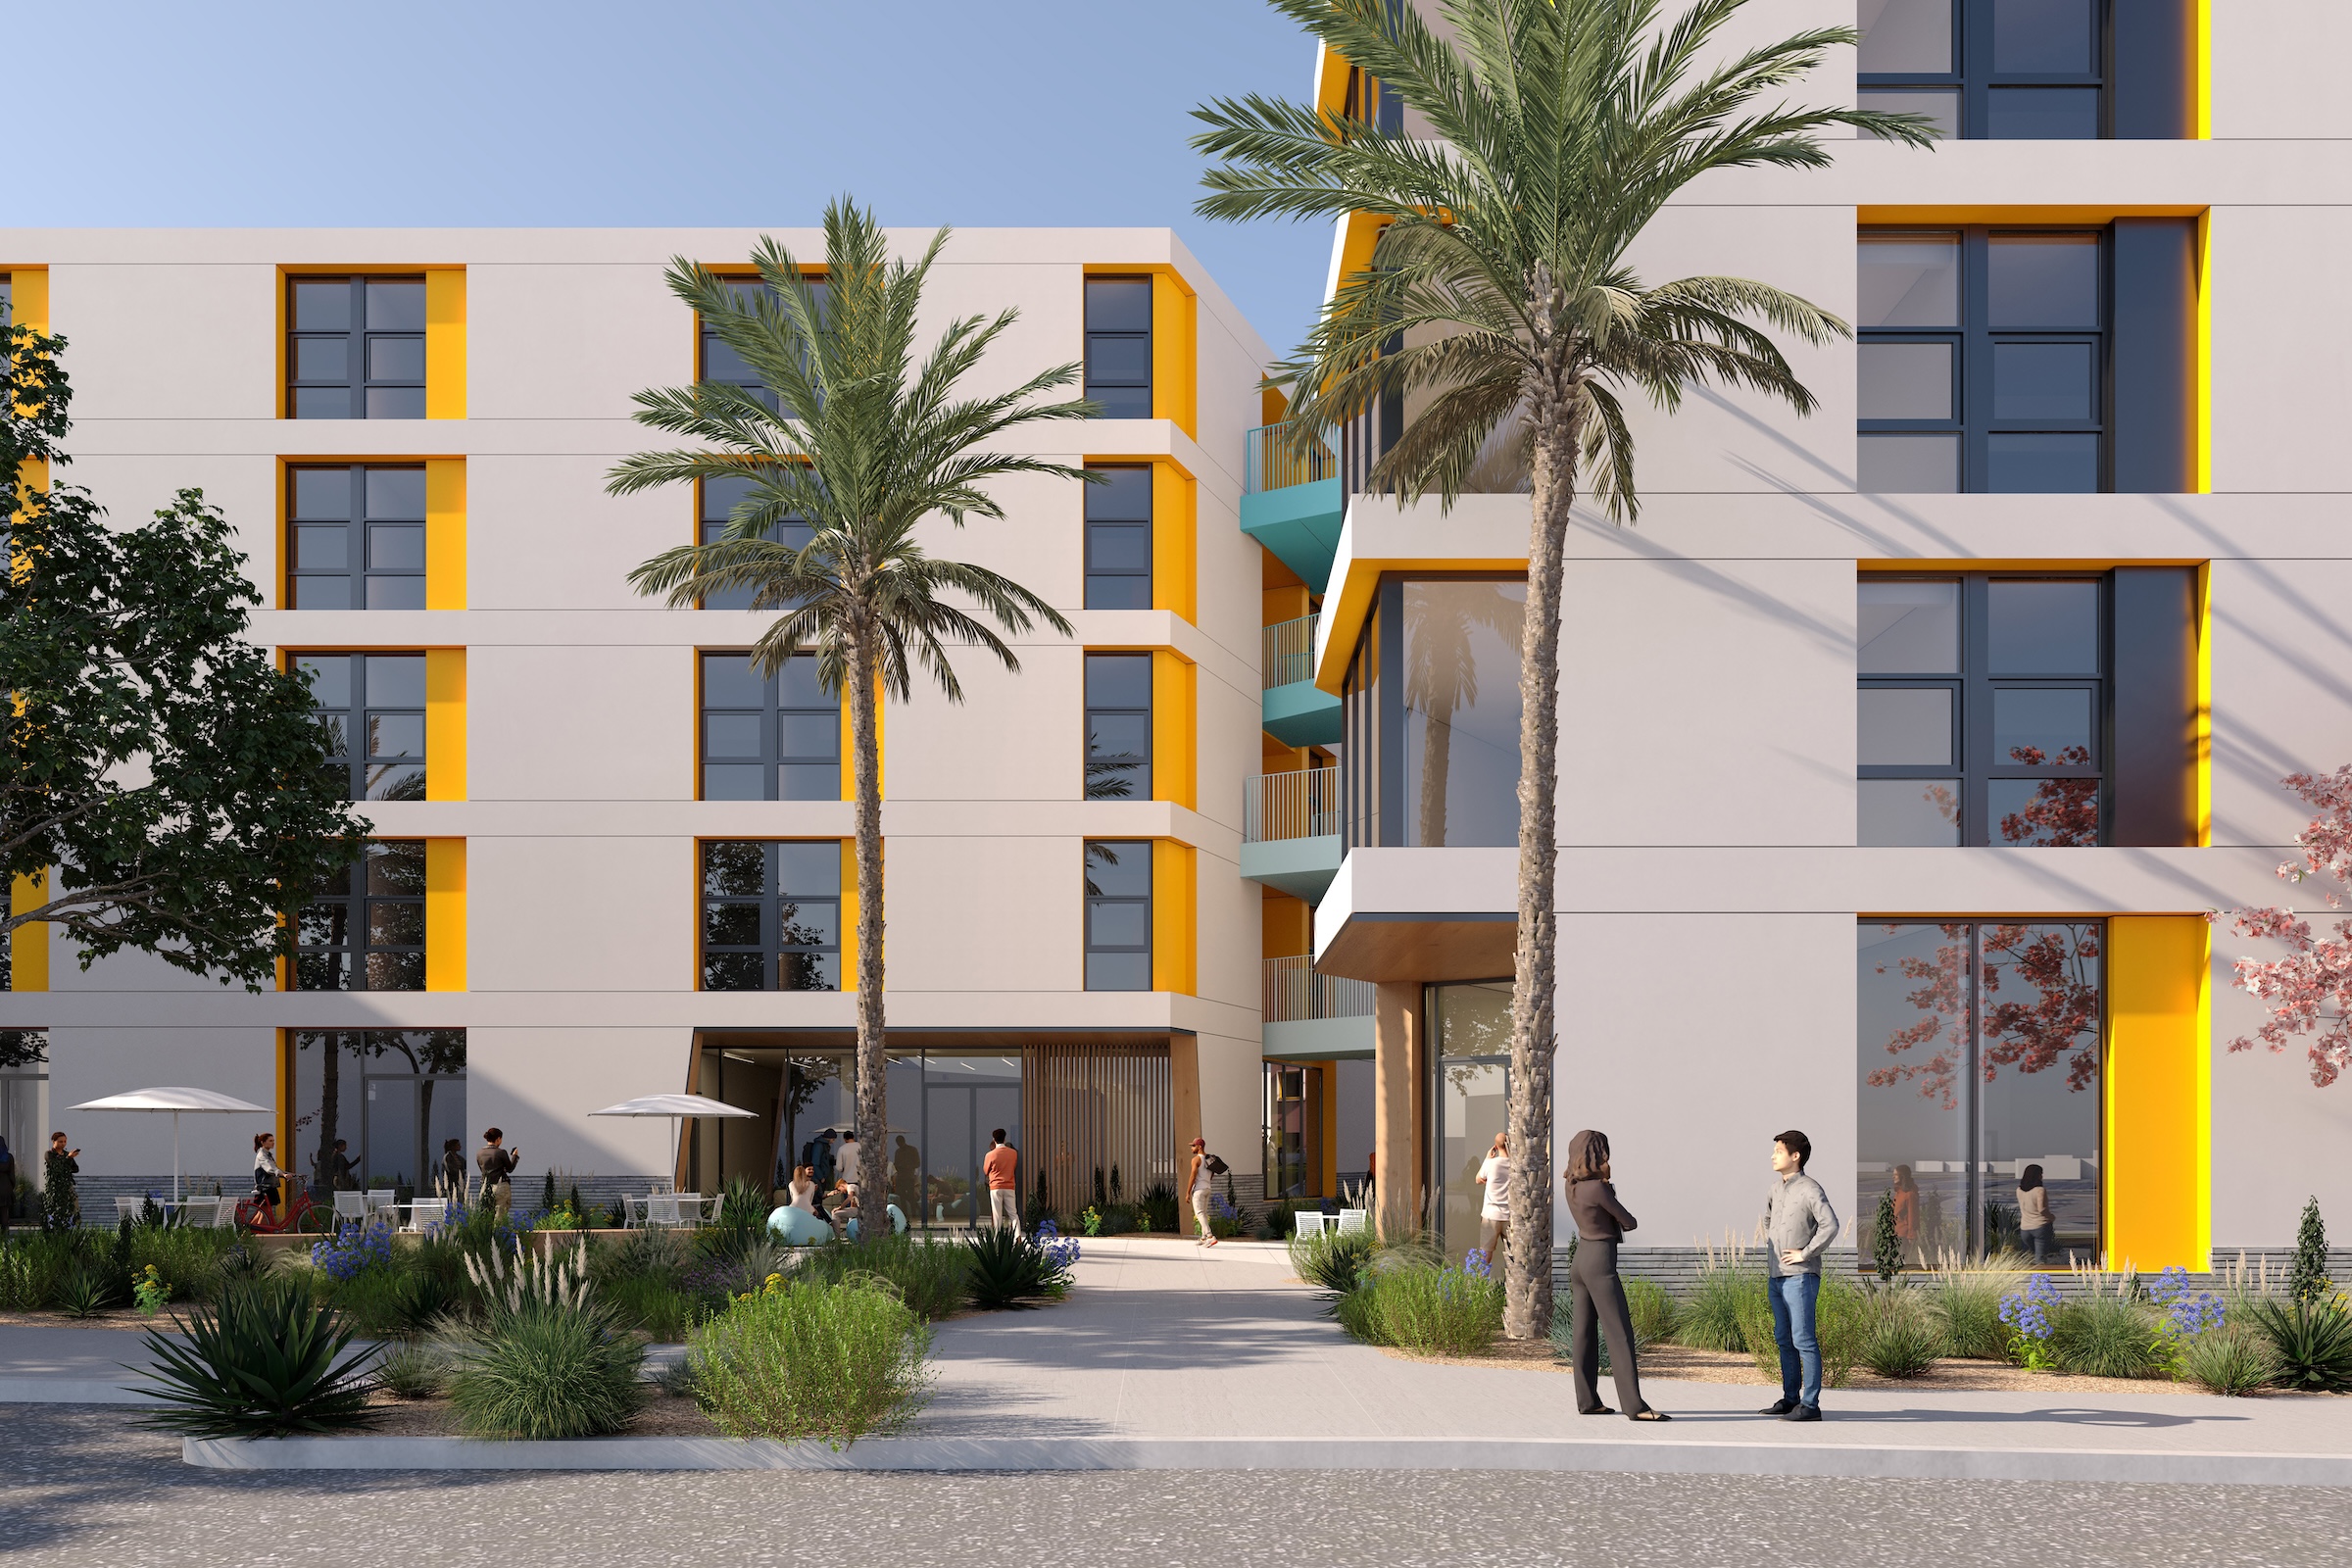 The 108,000 sf La Playa Residence Hall, funded by the State of California’s Higher Education Student Housing Grant Program, will consist of three five-story structures connected by bridges.